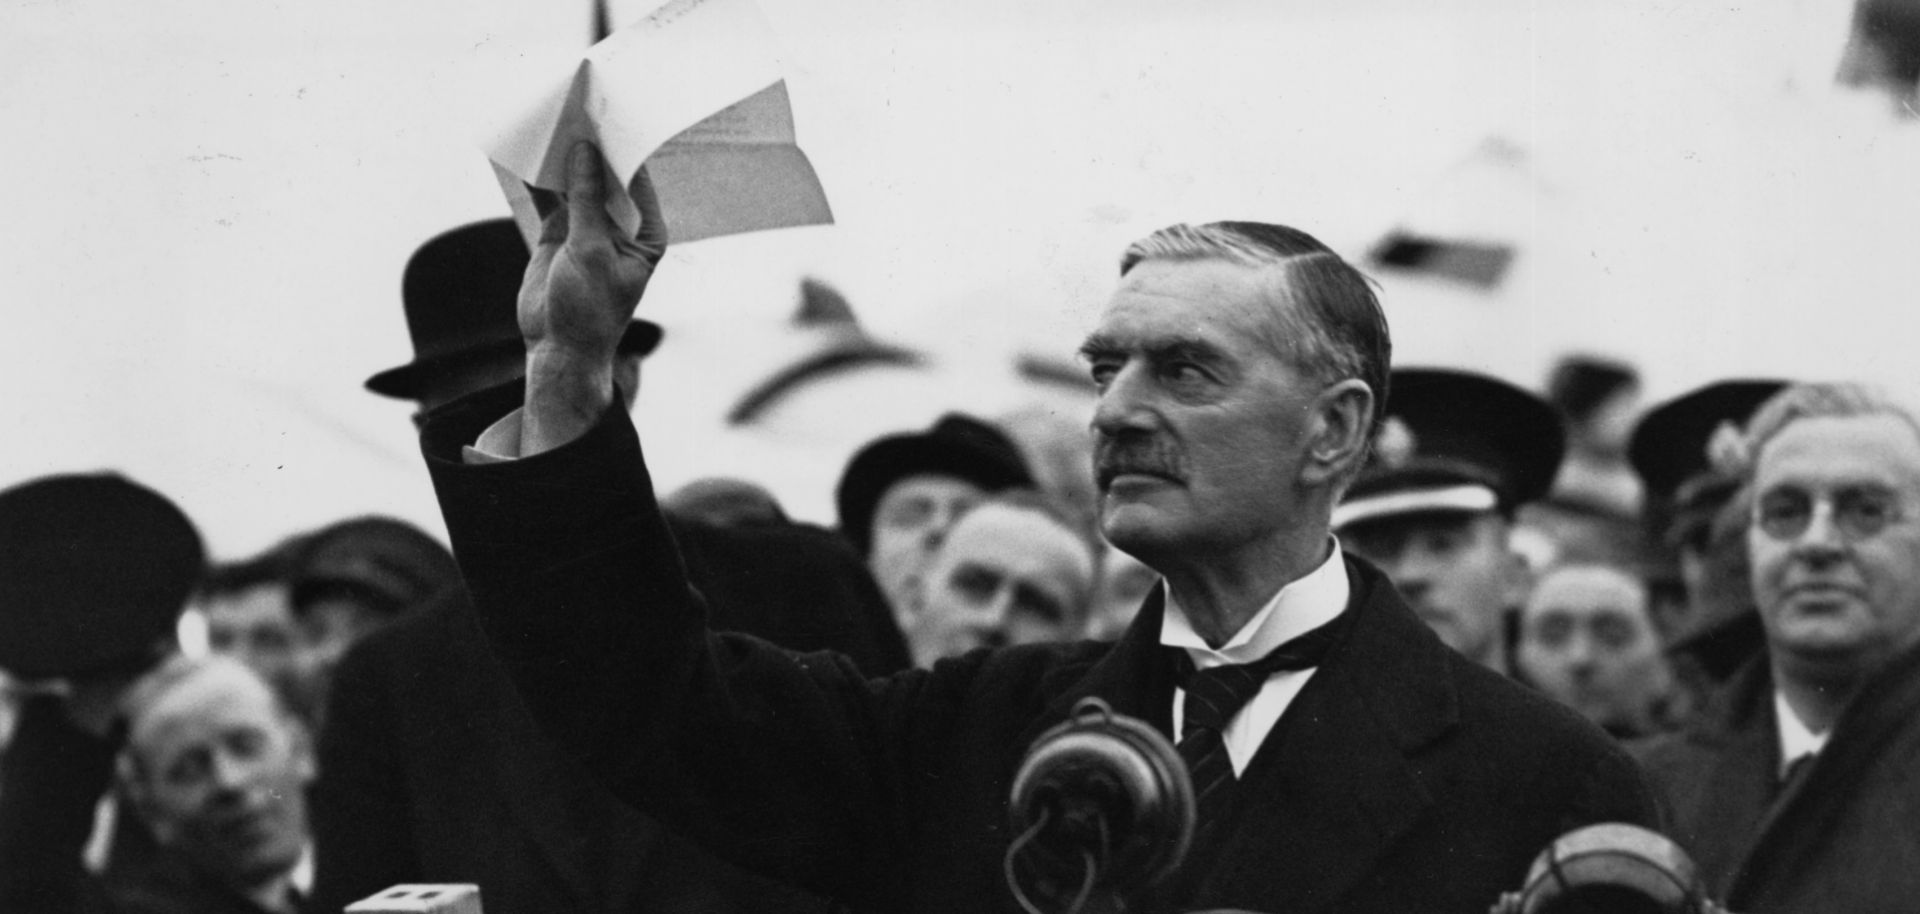 British Prime Minister Neville Chamberlain arrives at Heston airport outside London in 1938 with the Munich Pact he and Germany's Adolf Hitler signed.